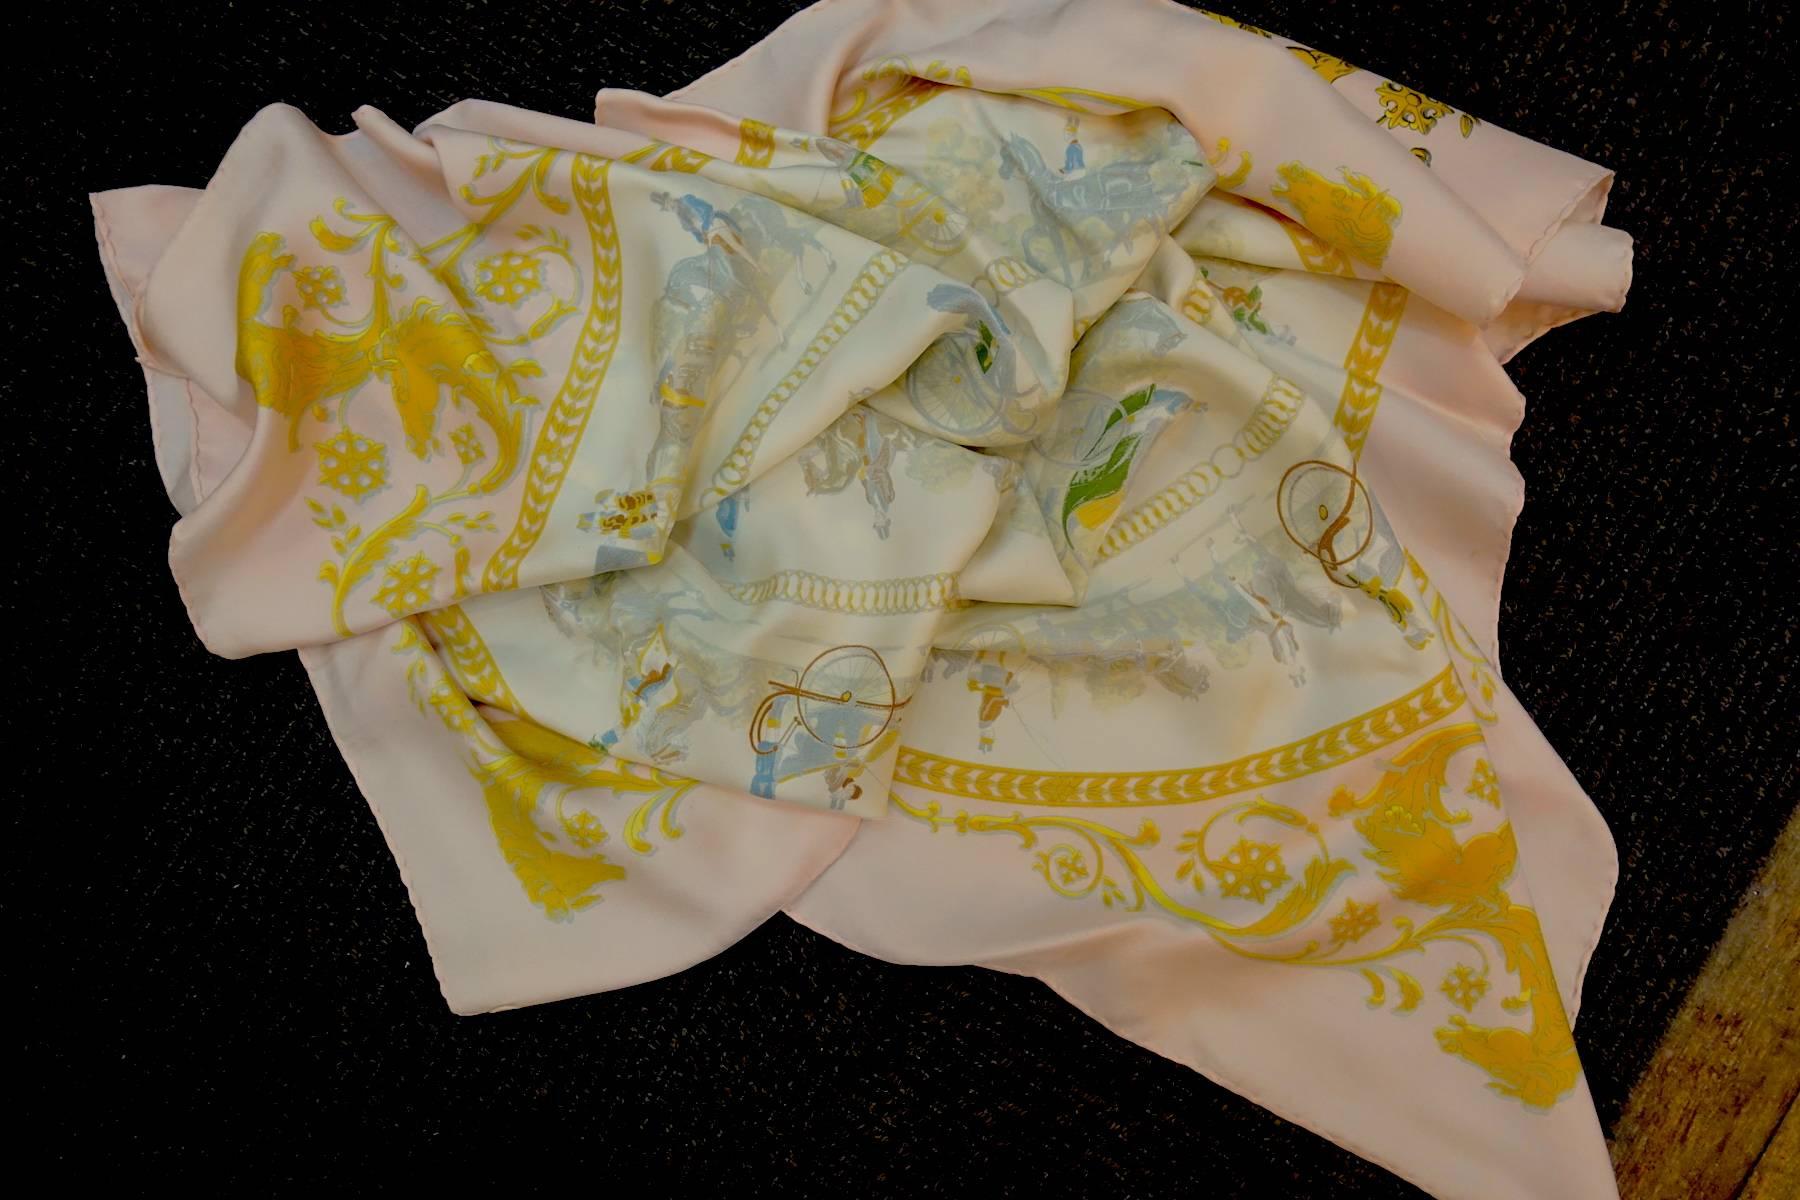 This vintage Hermès Paris silk scarf features the “La Promenade De Longchamps” design by Philippe Ledoux in shades of soft peach, yellow, green and beige. In excellent condition, this Hermes scarf measures approx. 34” x 35” with hand-rolled/stitched